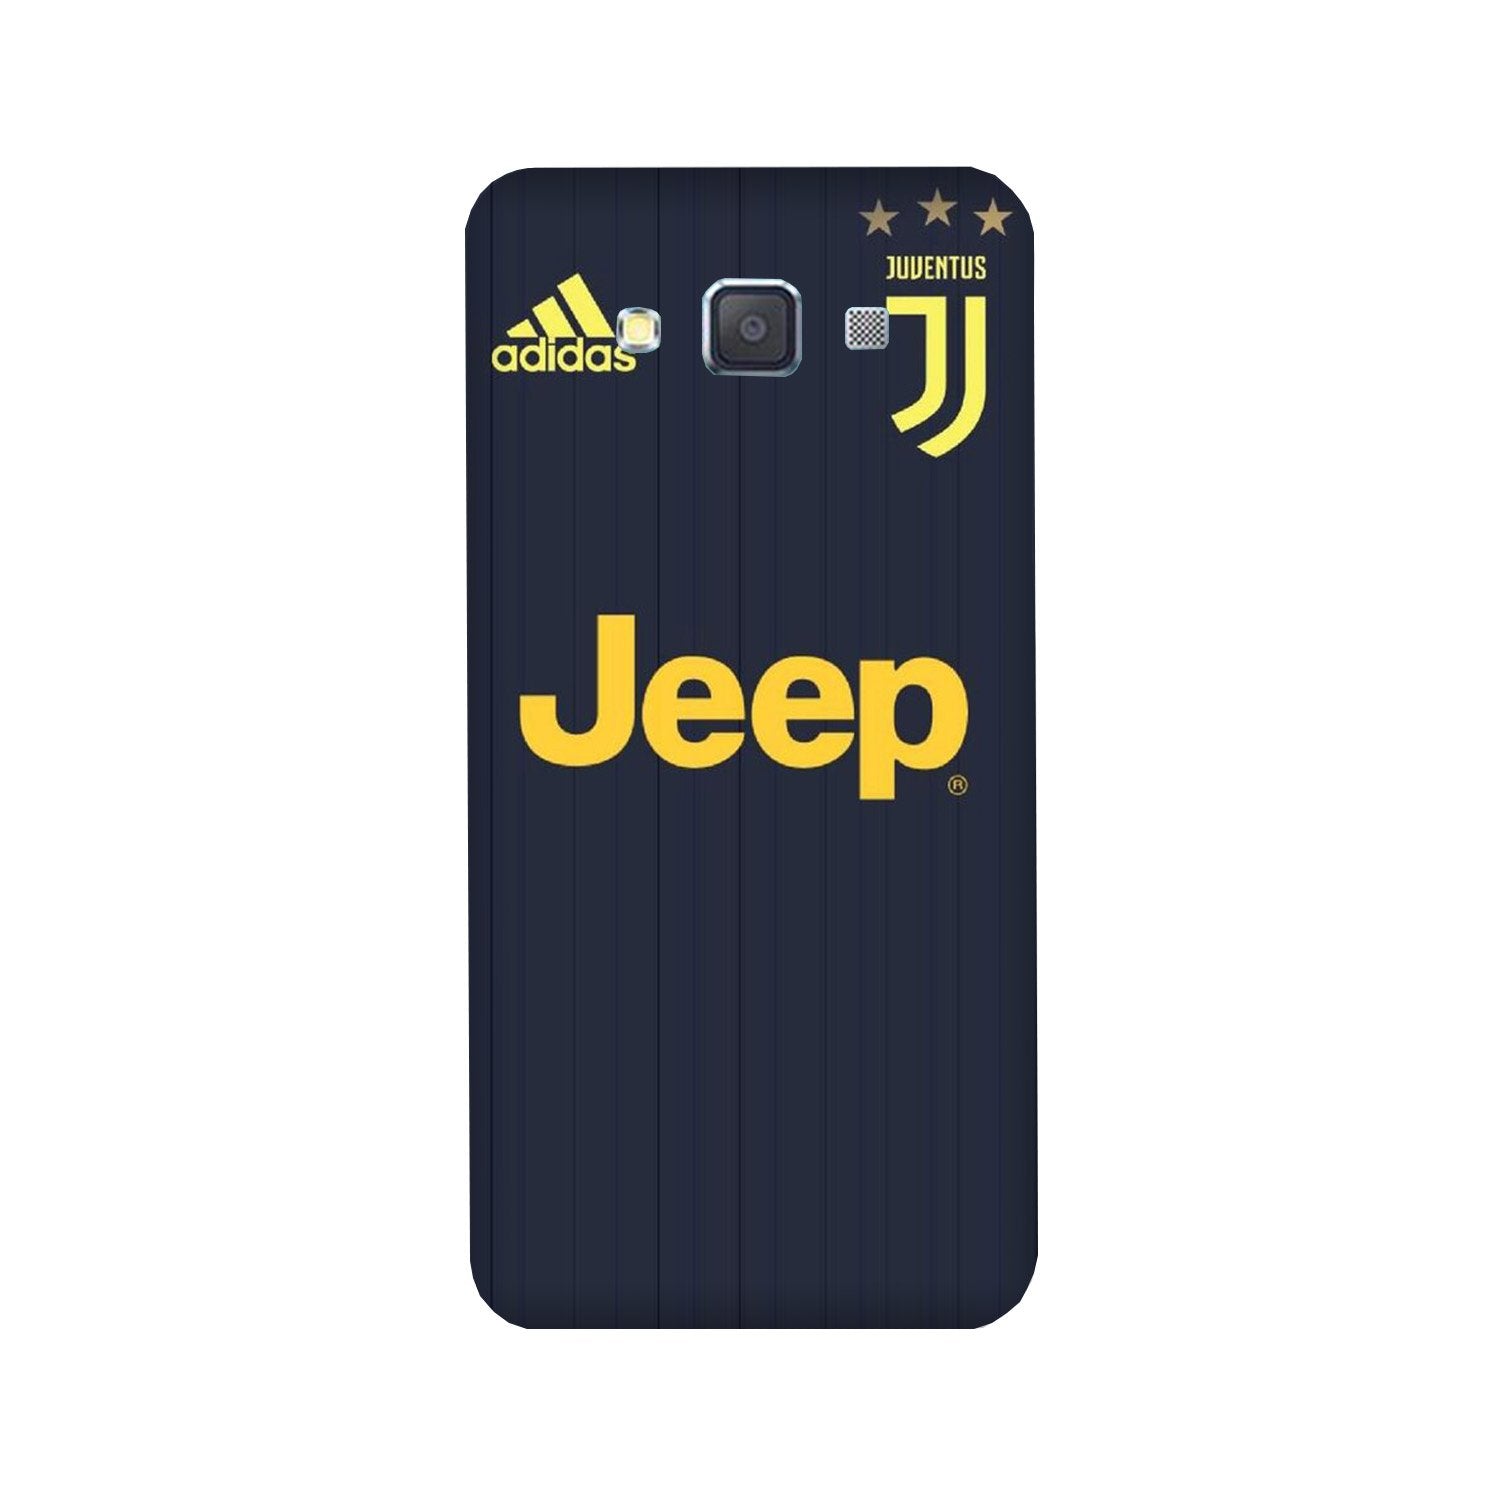 Jeep Juventus Case for Galaxy Grand Max  (Design - 161)